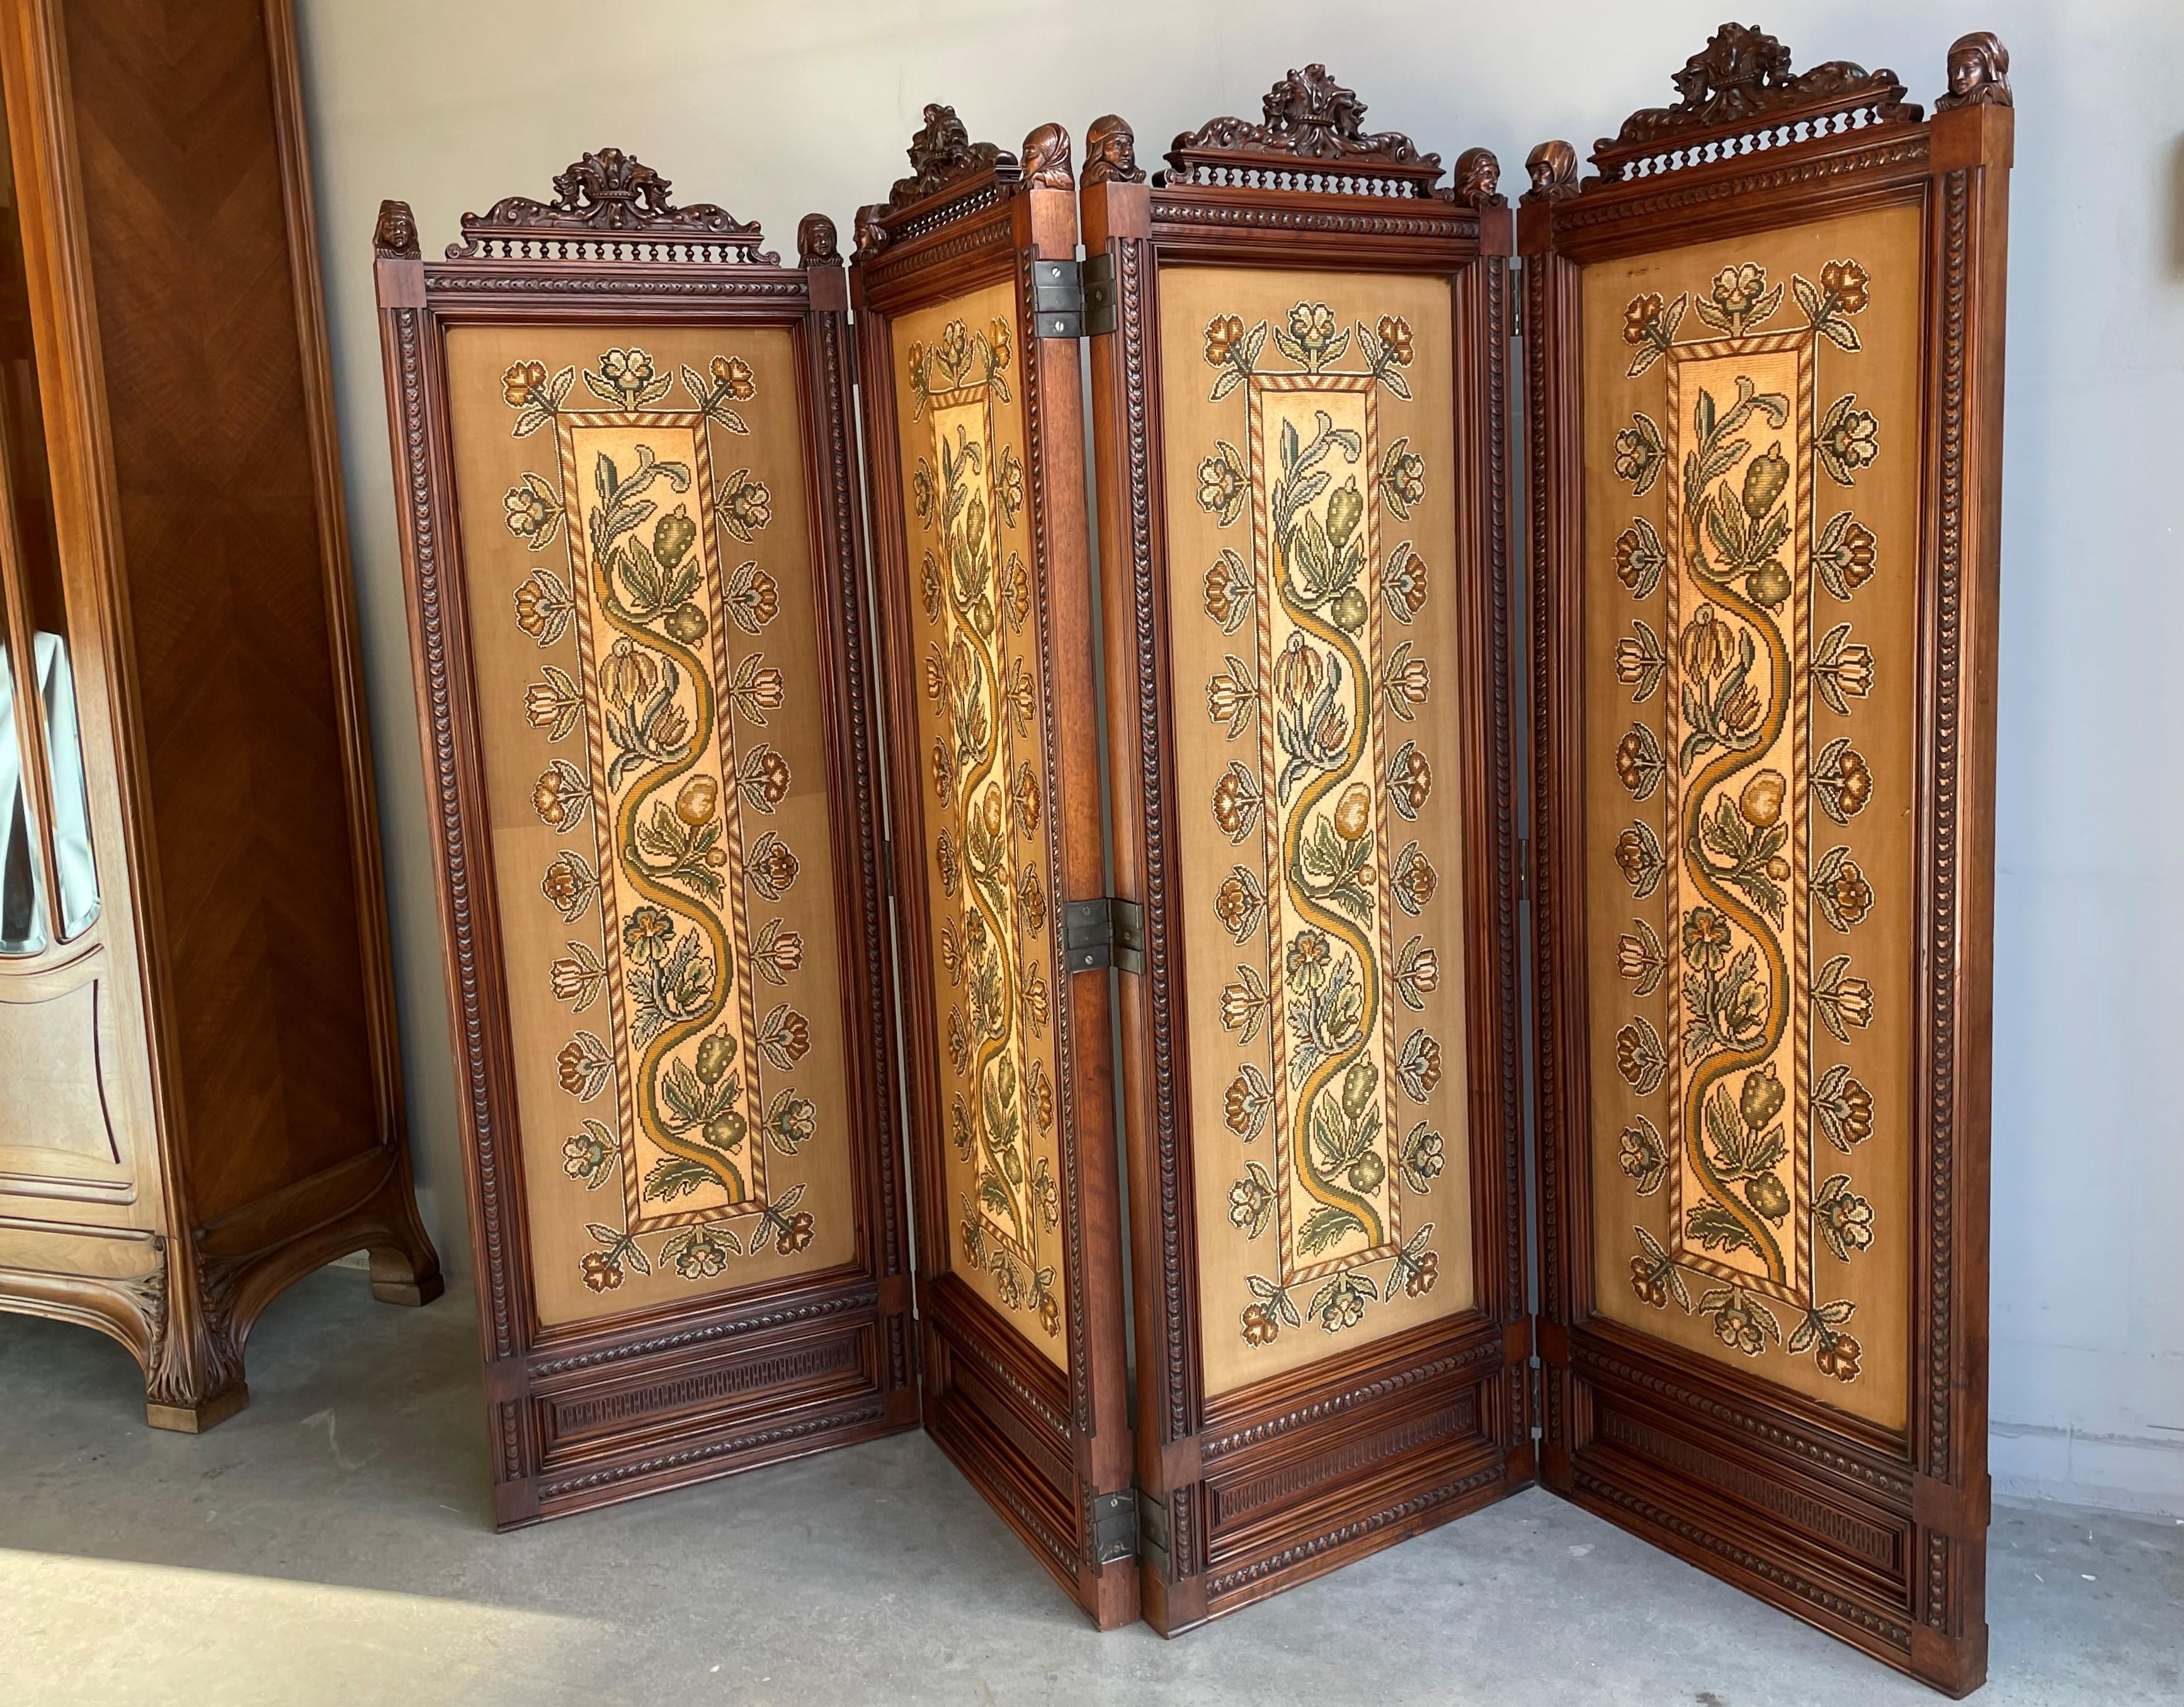 Stunning Renaissance Revival Folding Screen w. Embroidery and 8 Bust Sculptures 3